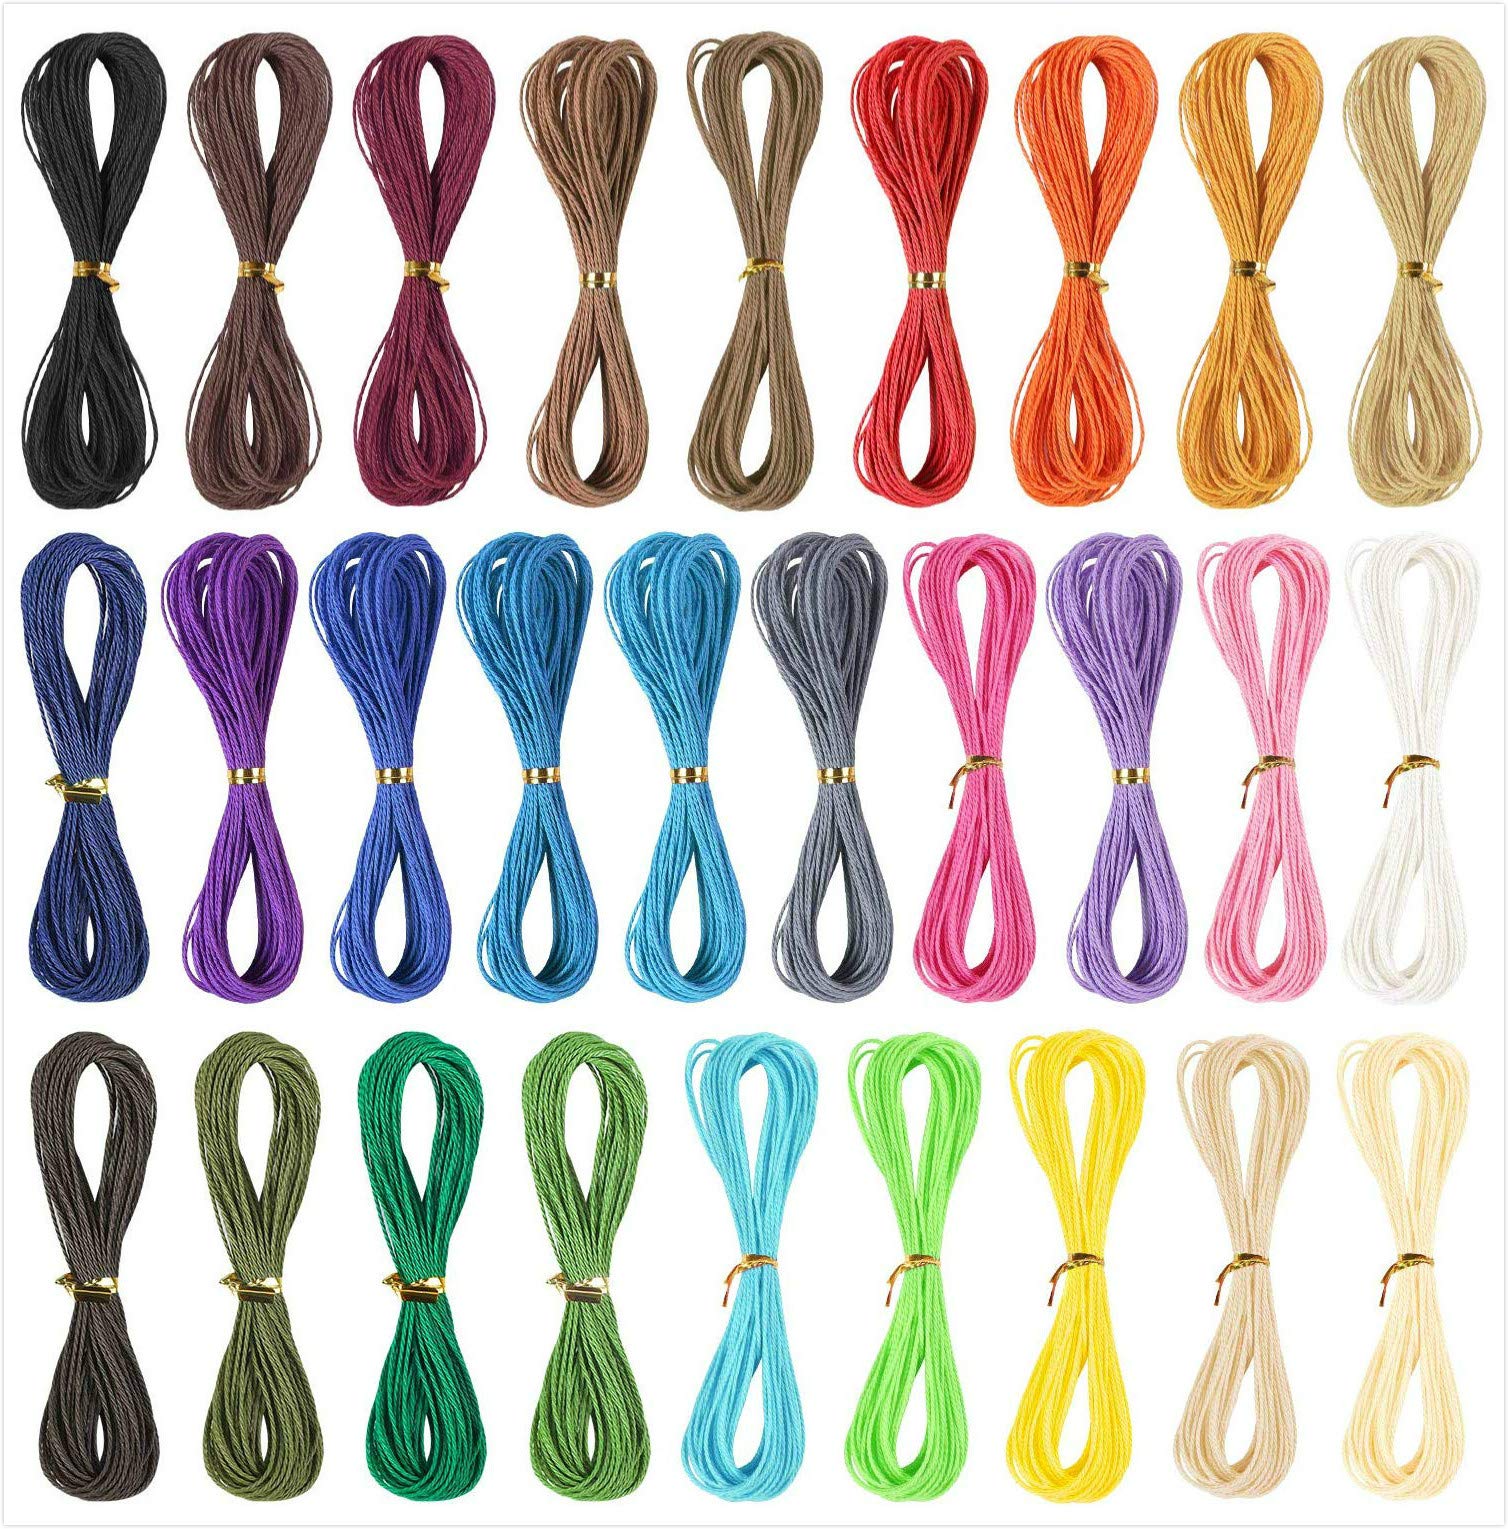 35 Colors 1mm Waxed Polyester Cord Bracelet Cord Wax Coated String